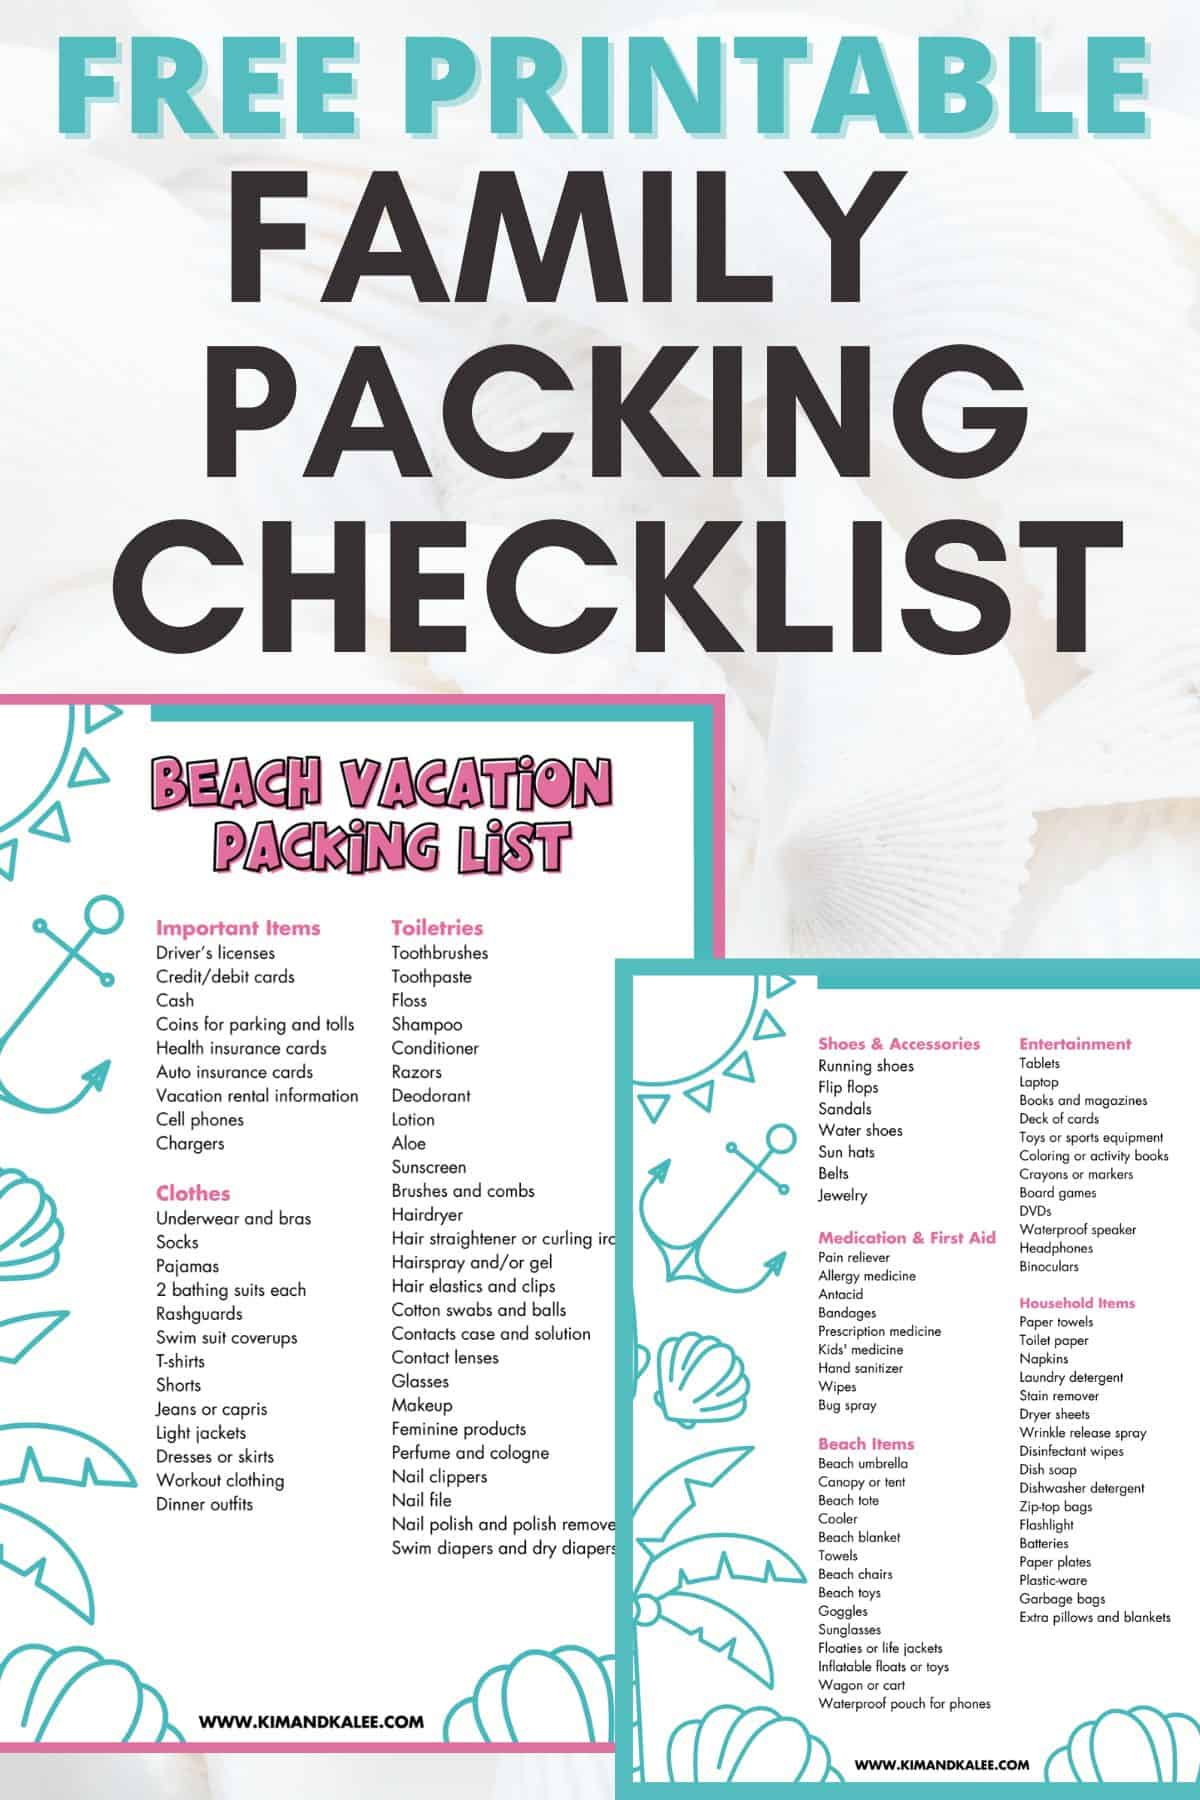 sample of the free printable family vacation packing list with text overlay "free printable family packing checklist"